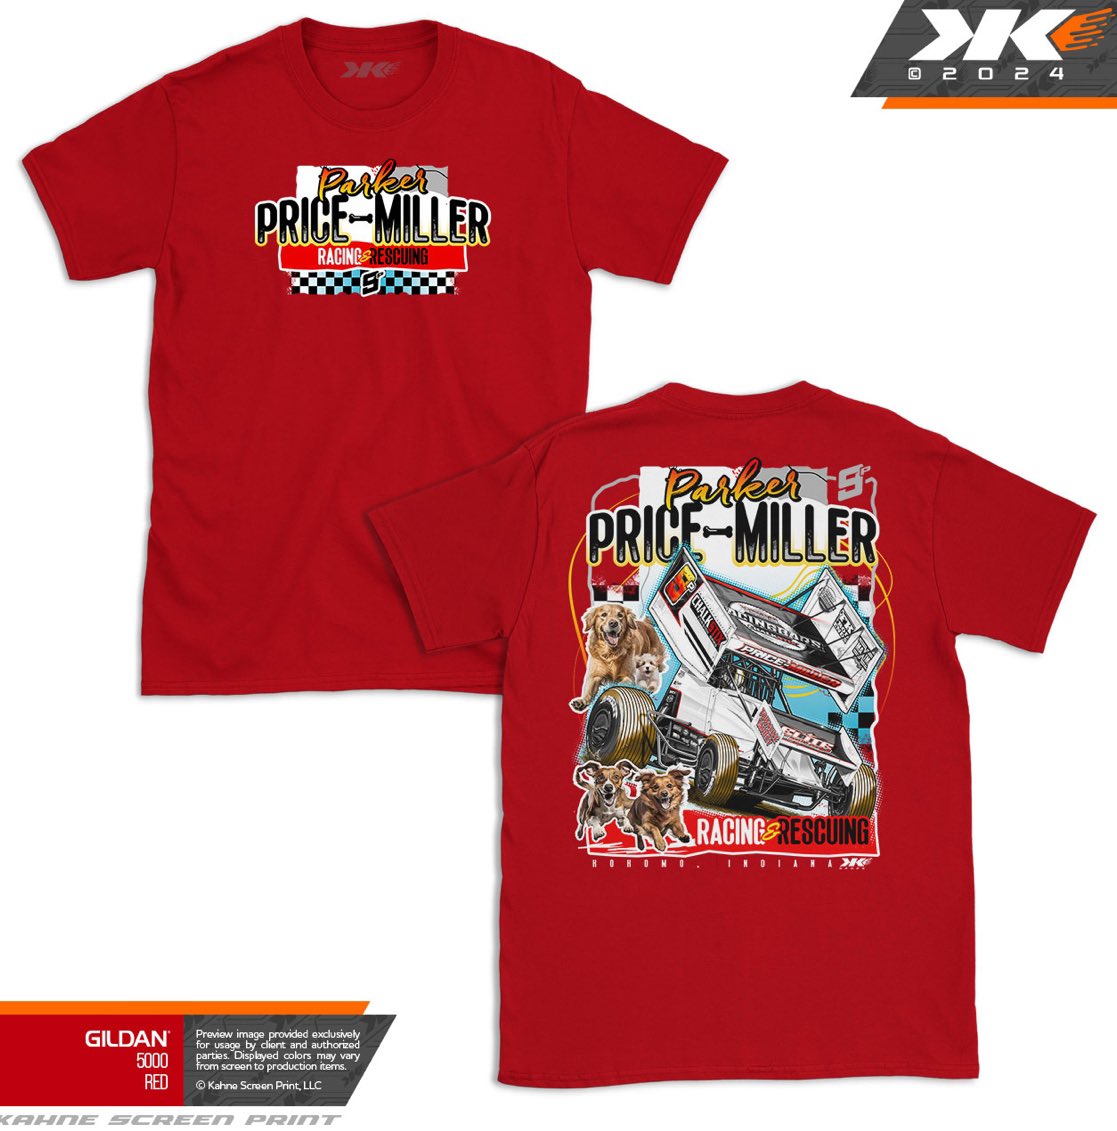 🚨Race & Rescue is OFFICALLY live on ppmracing19.com!🚨

These are available at the track starting tomorrow at Lakeside as well w/ @HighLimitRacing!

Reminder that 50% of all proceeds will be donated to the Kokomo Humans Society🐶🐱